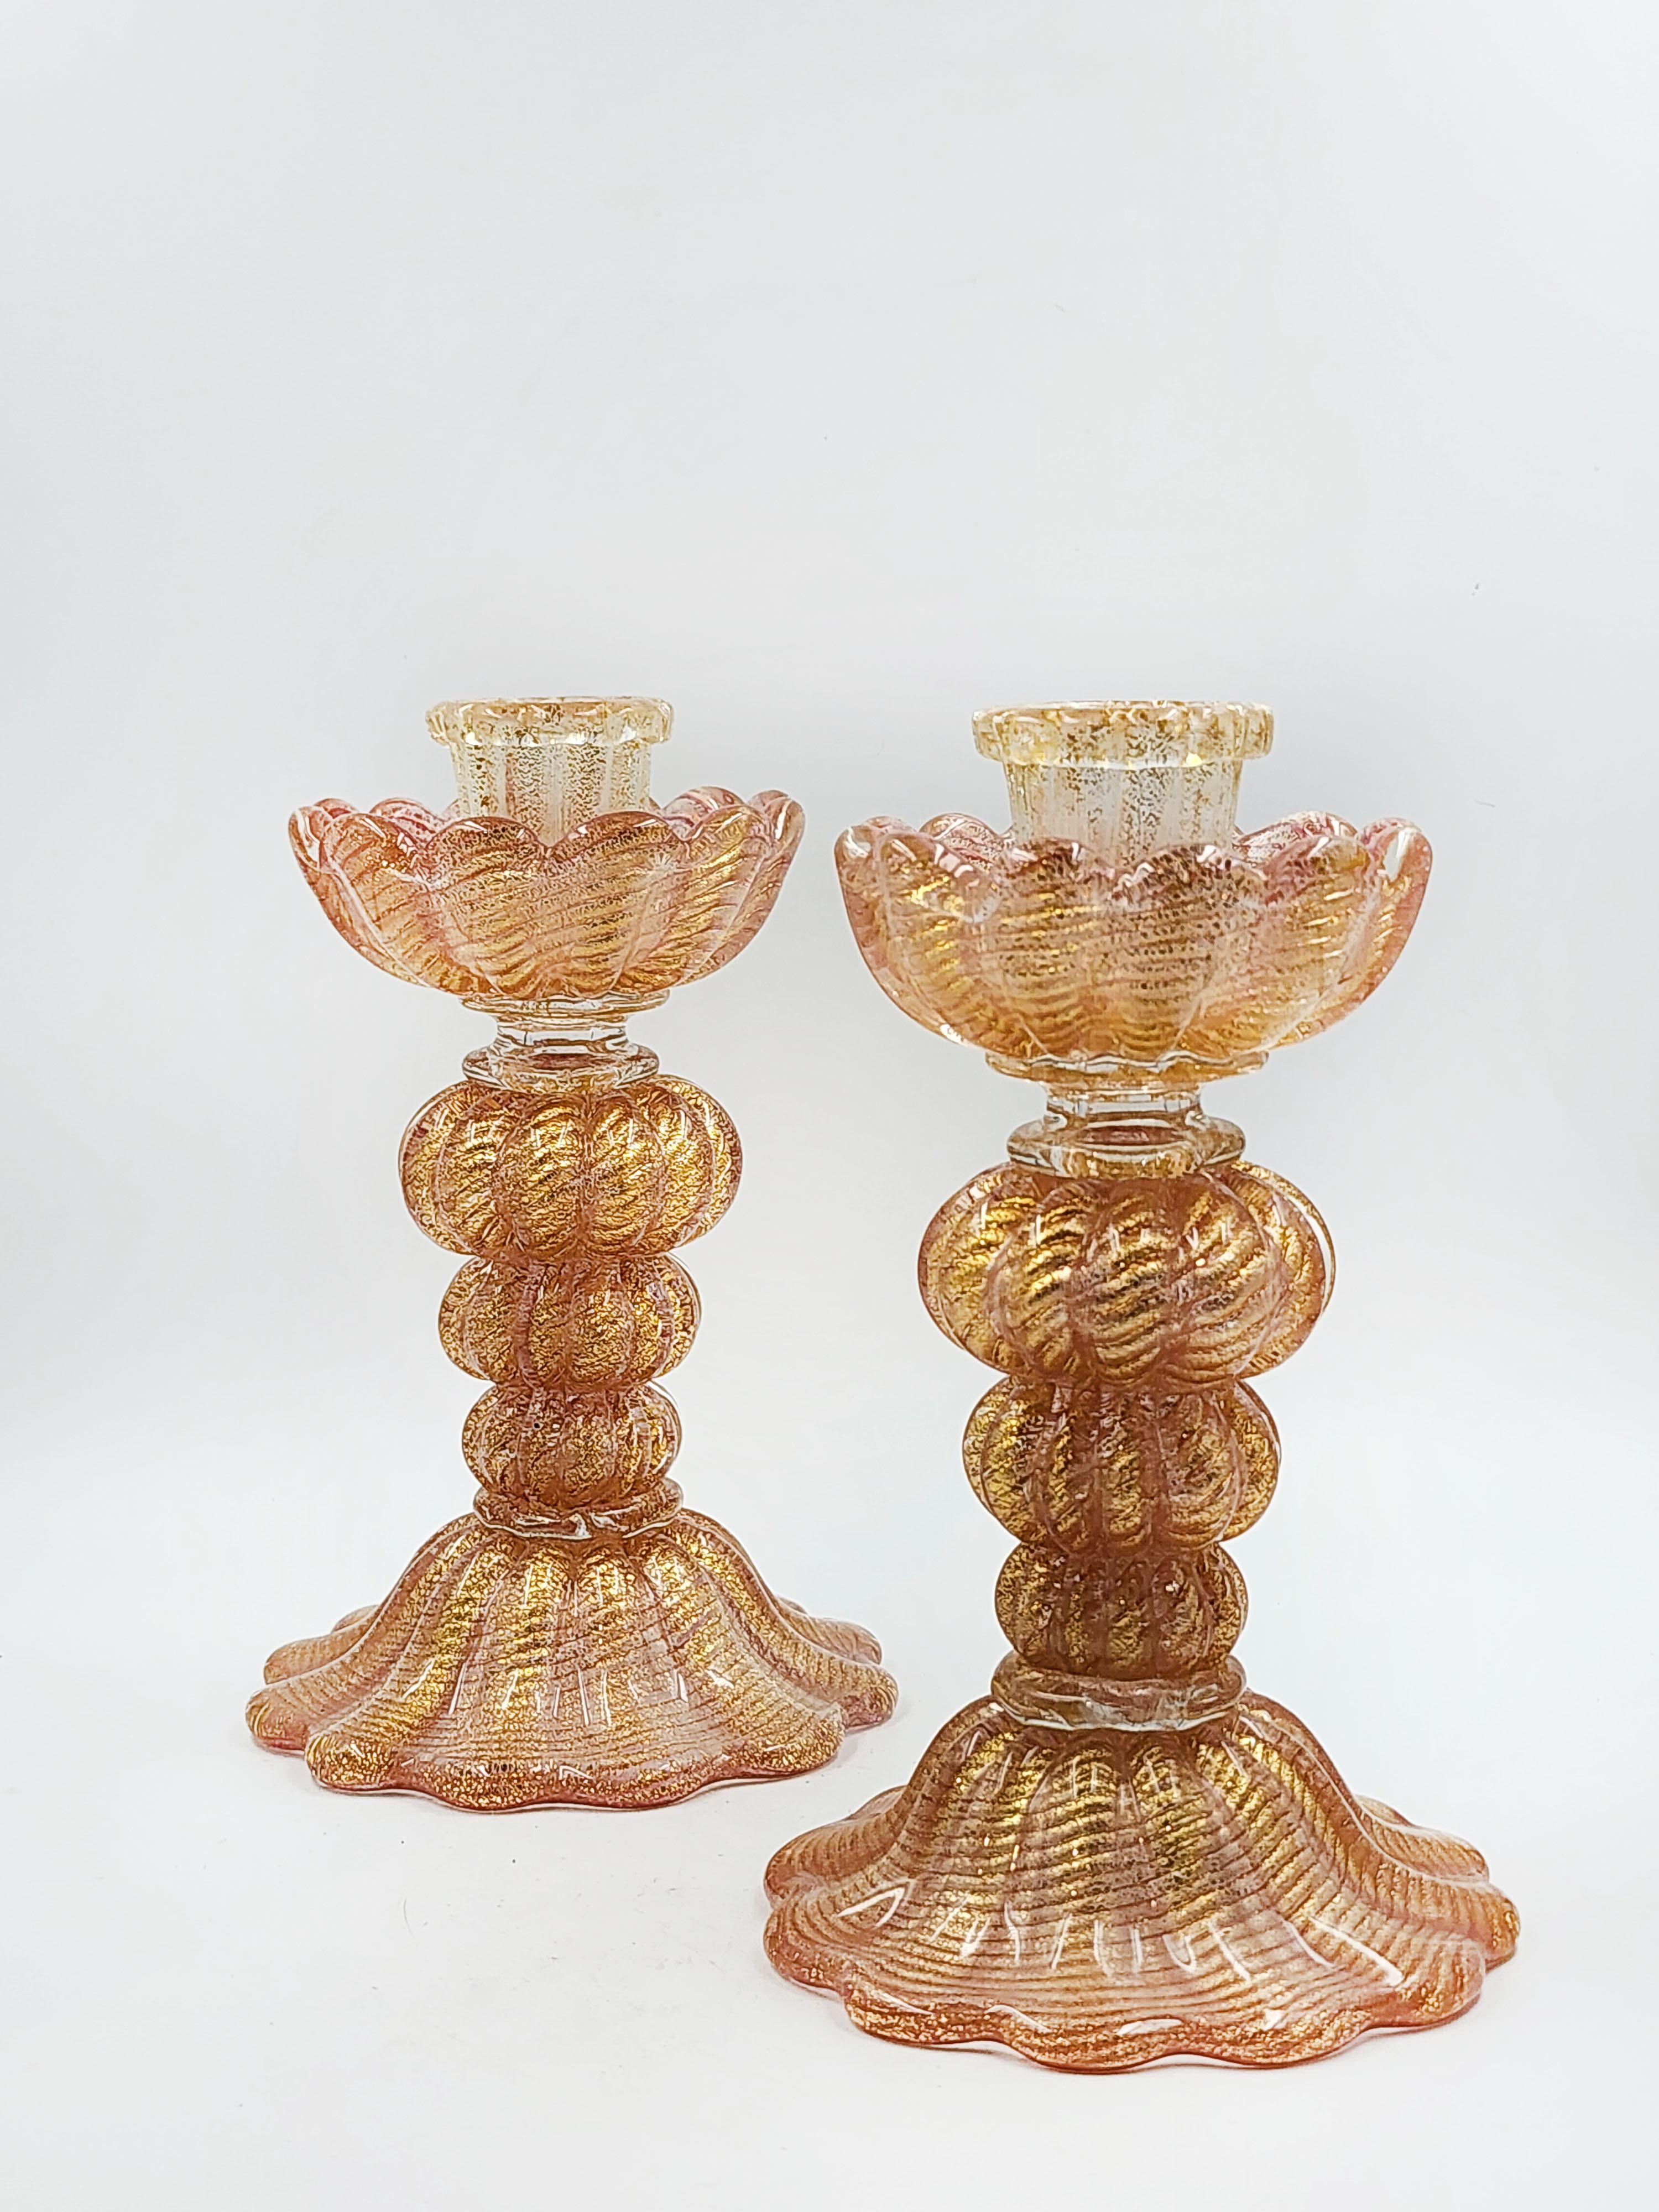 Pair of candlesticks with a design with golden murano glass specks
Beautiful pair of coral murano glass candle holders with gold flecks that make it stand out with a complex and textured design giving an oceanic feel, with wavy folds and intricate